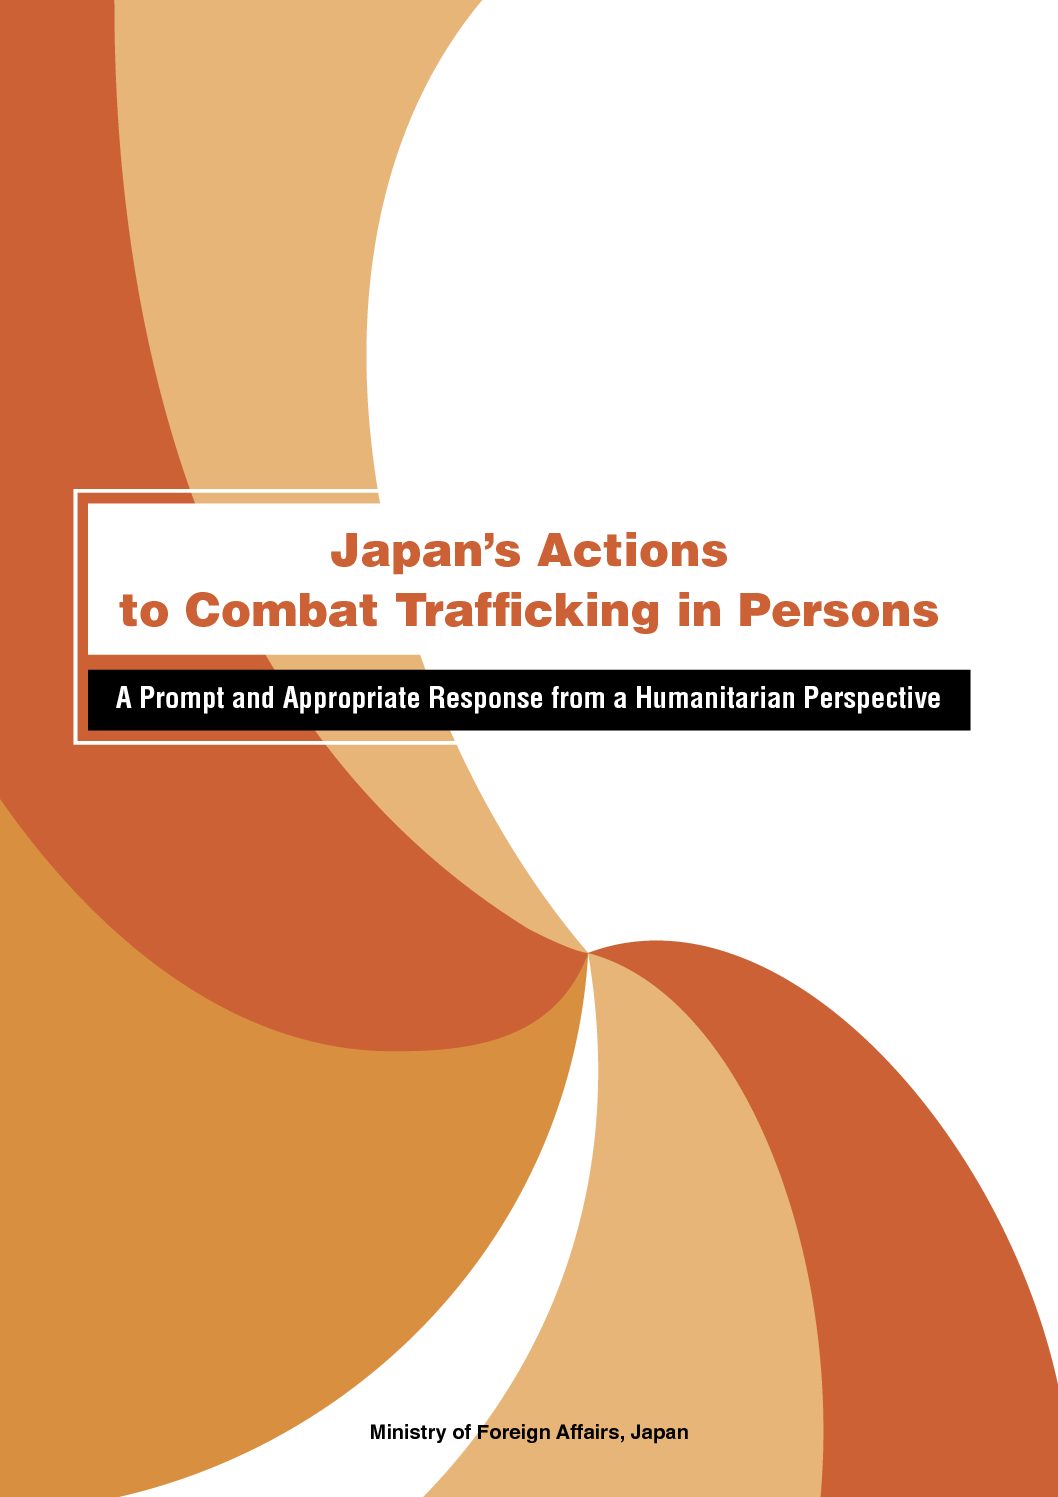 Japan’s Actions to Combat Trafficking in Persons: A Prompt and Appropriate Response from a Humanitarian Perspective